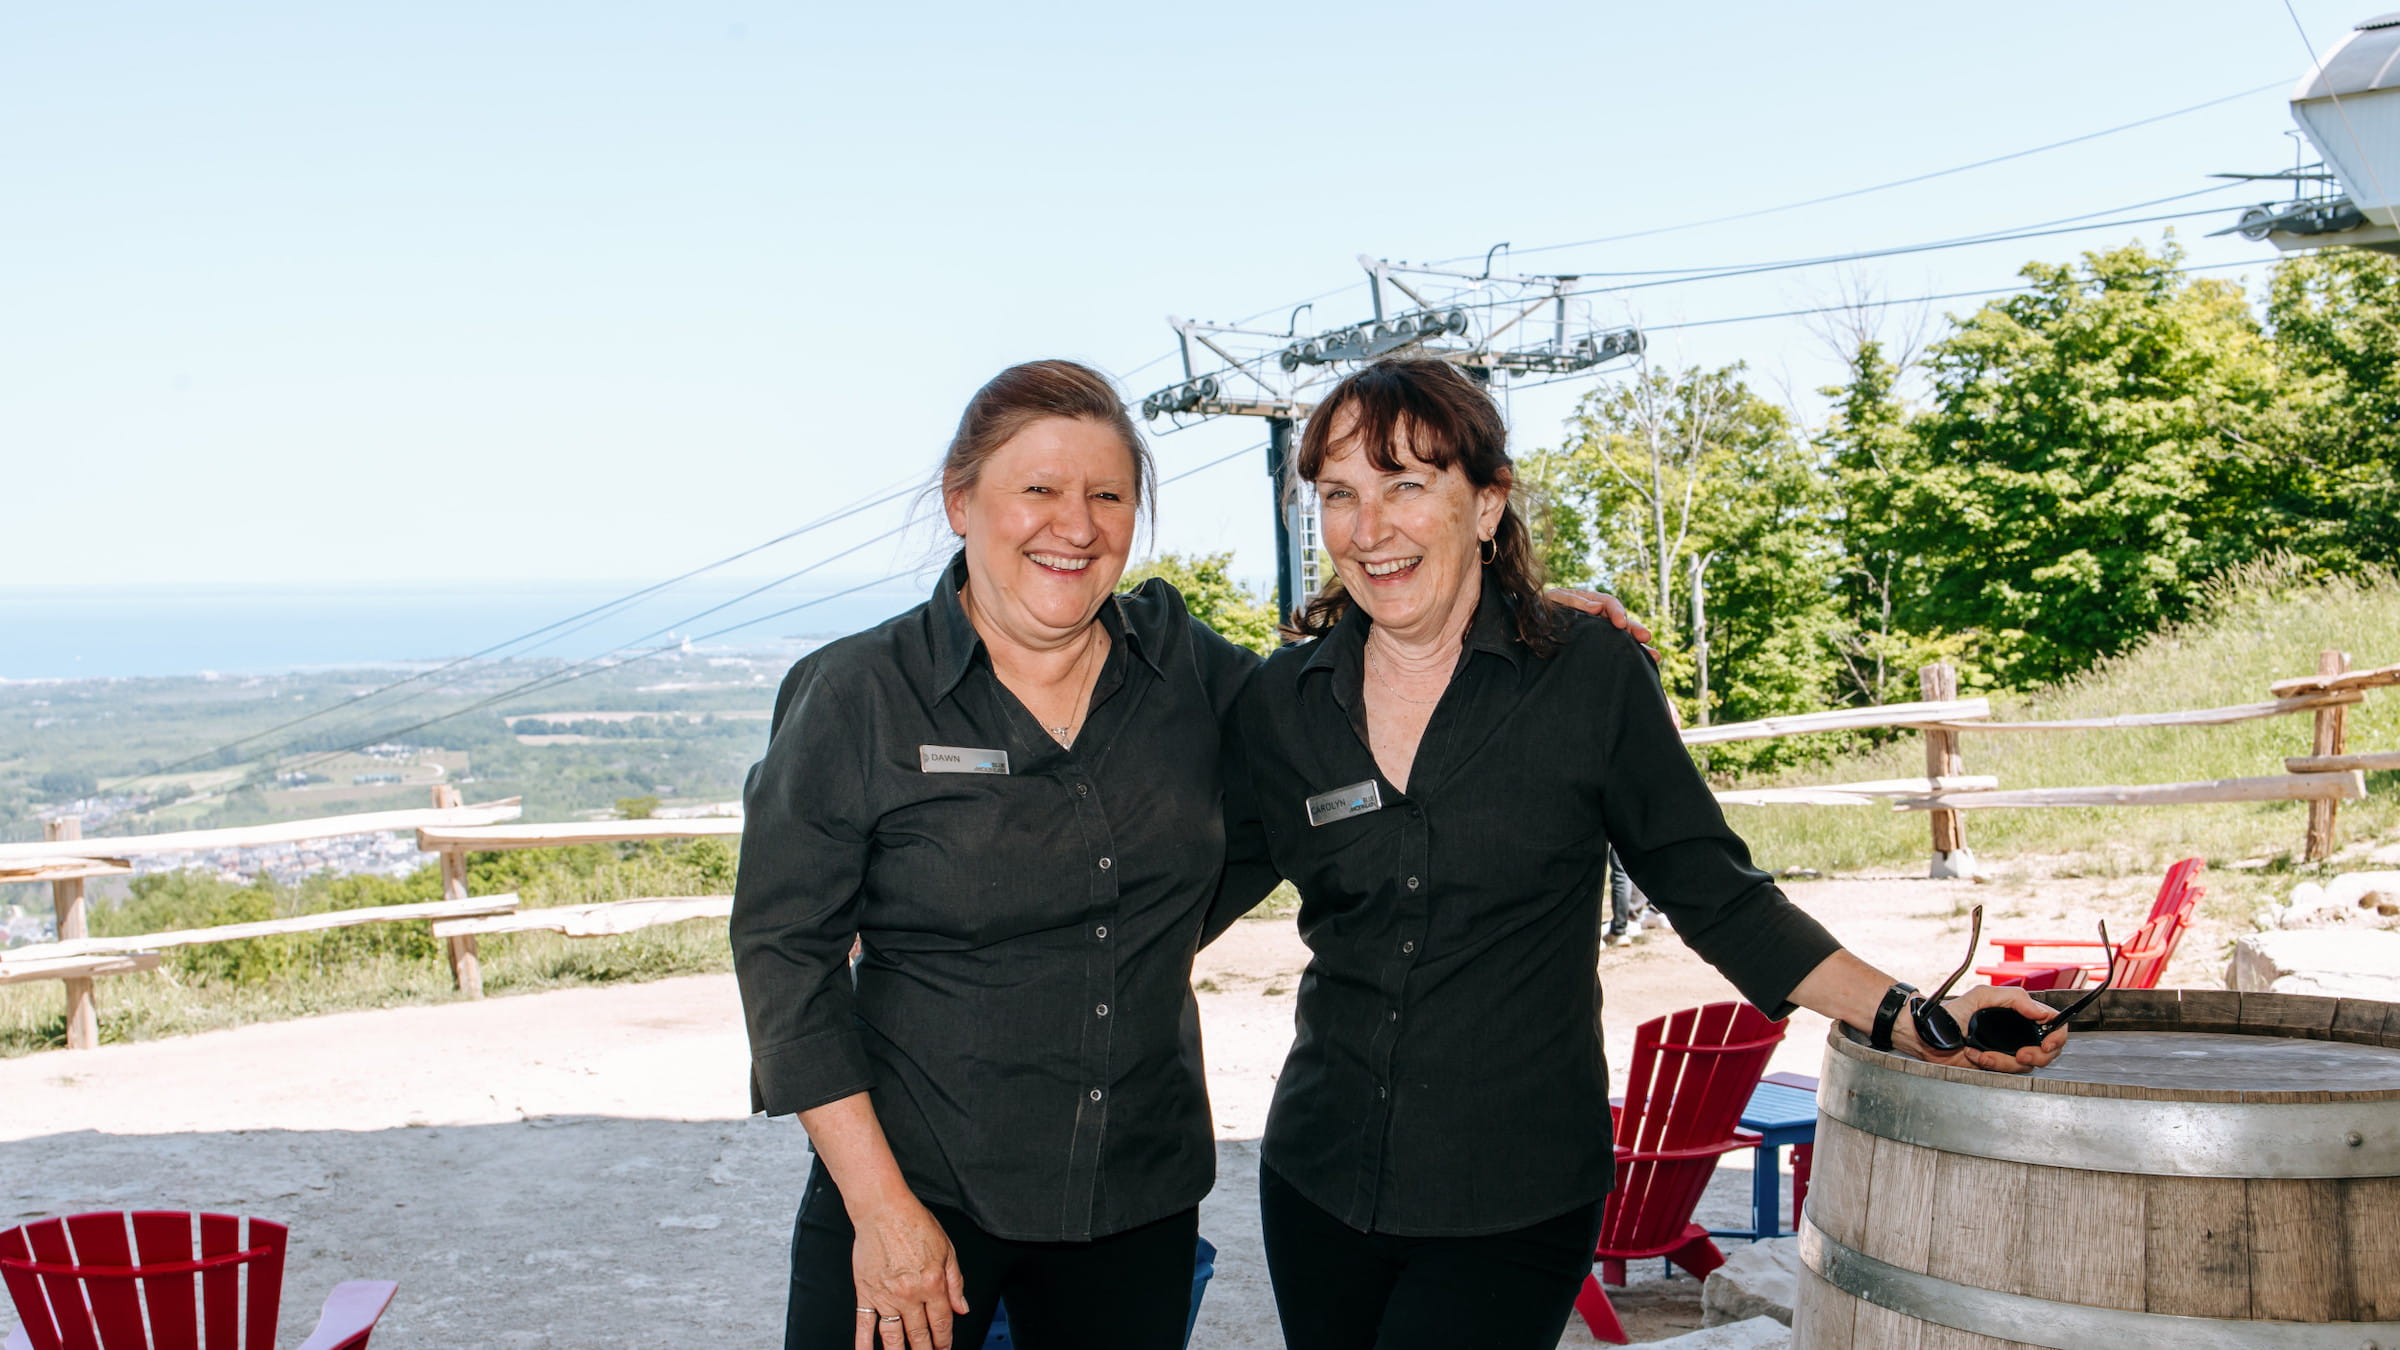 Two employees standing in Summitview Restaurant at Blue mountain overlooking Georgian Bay